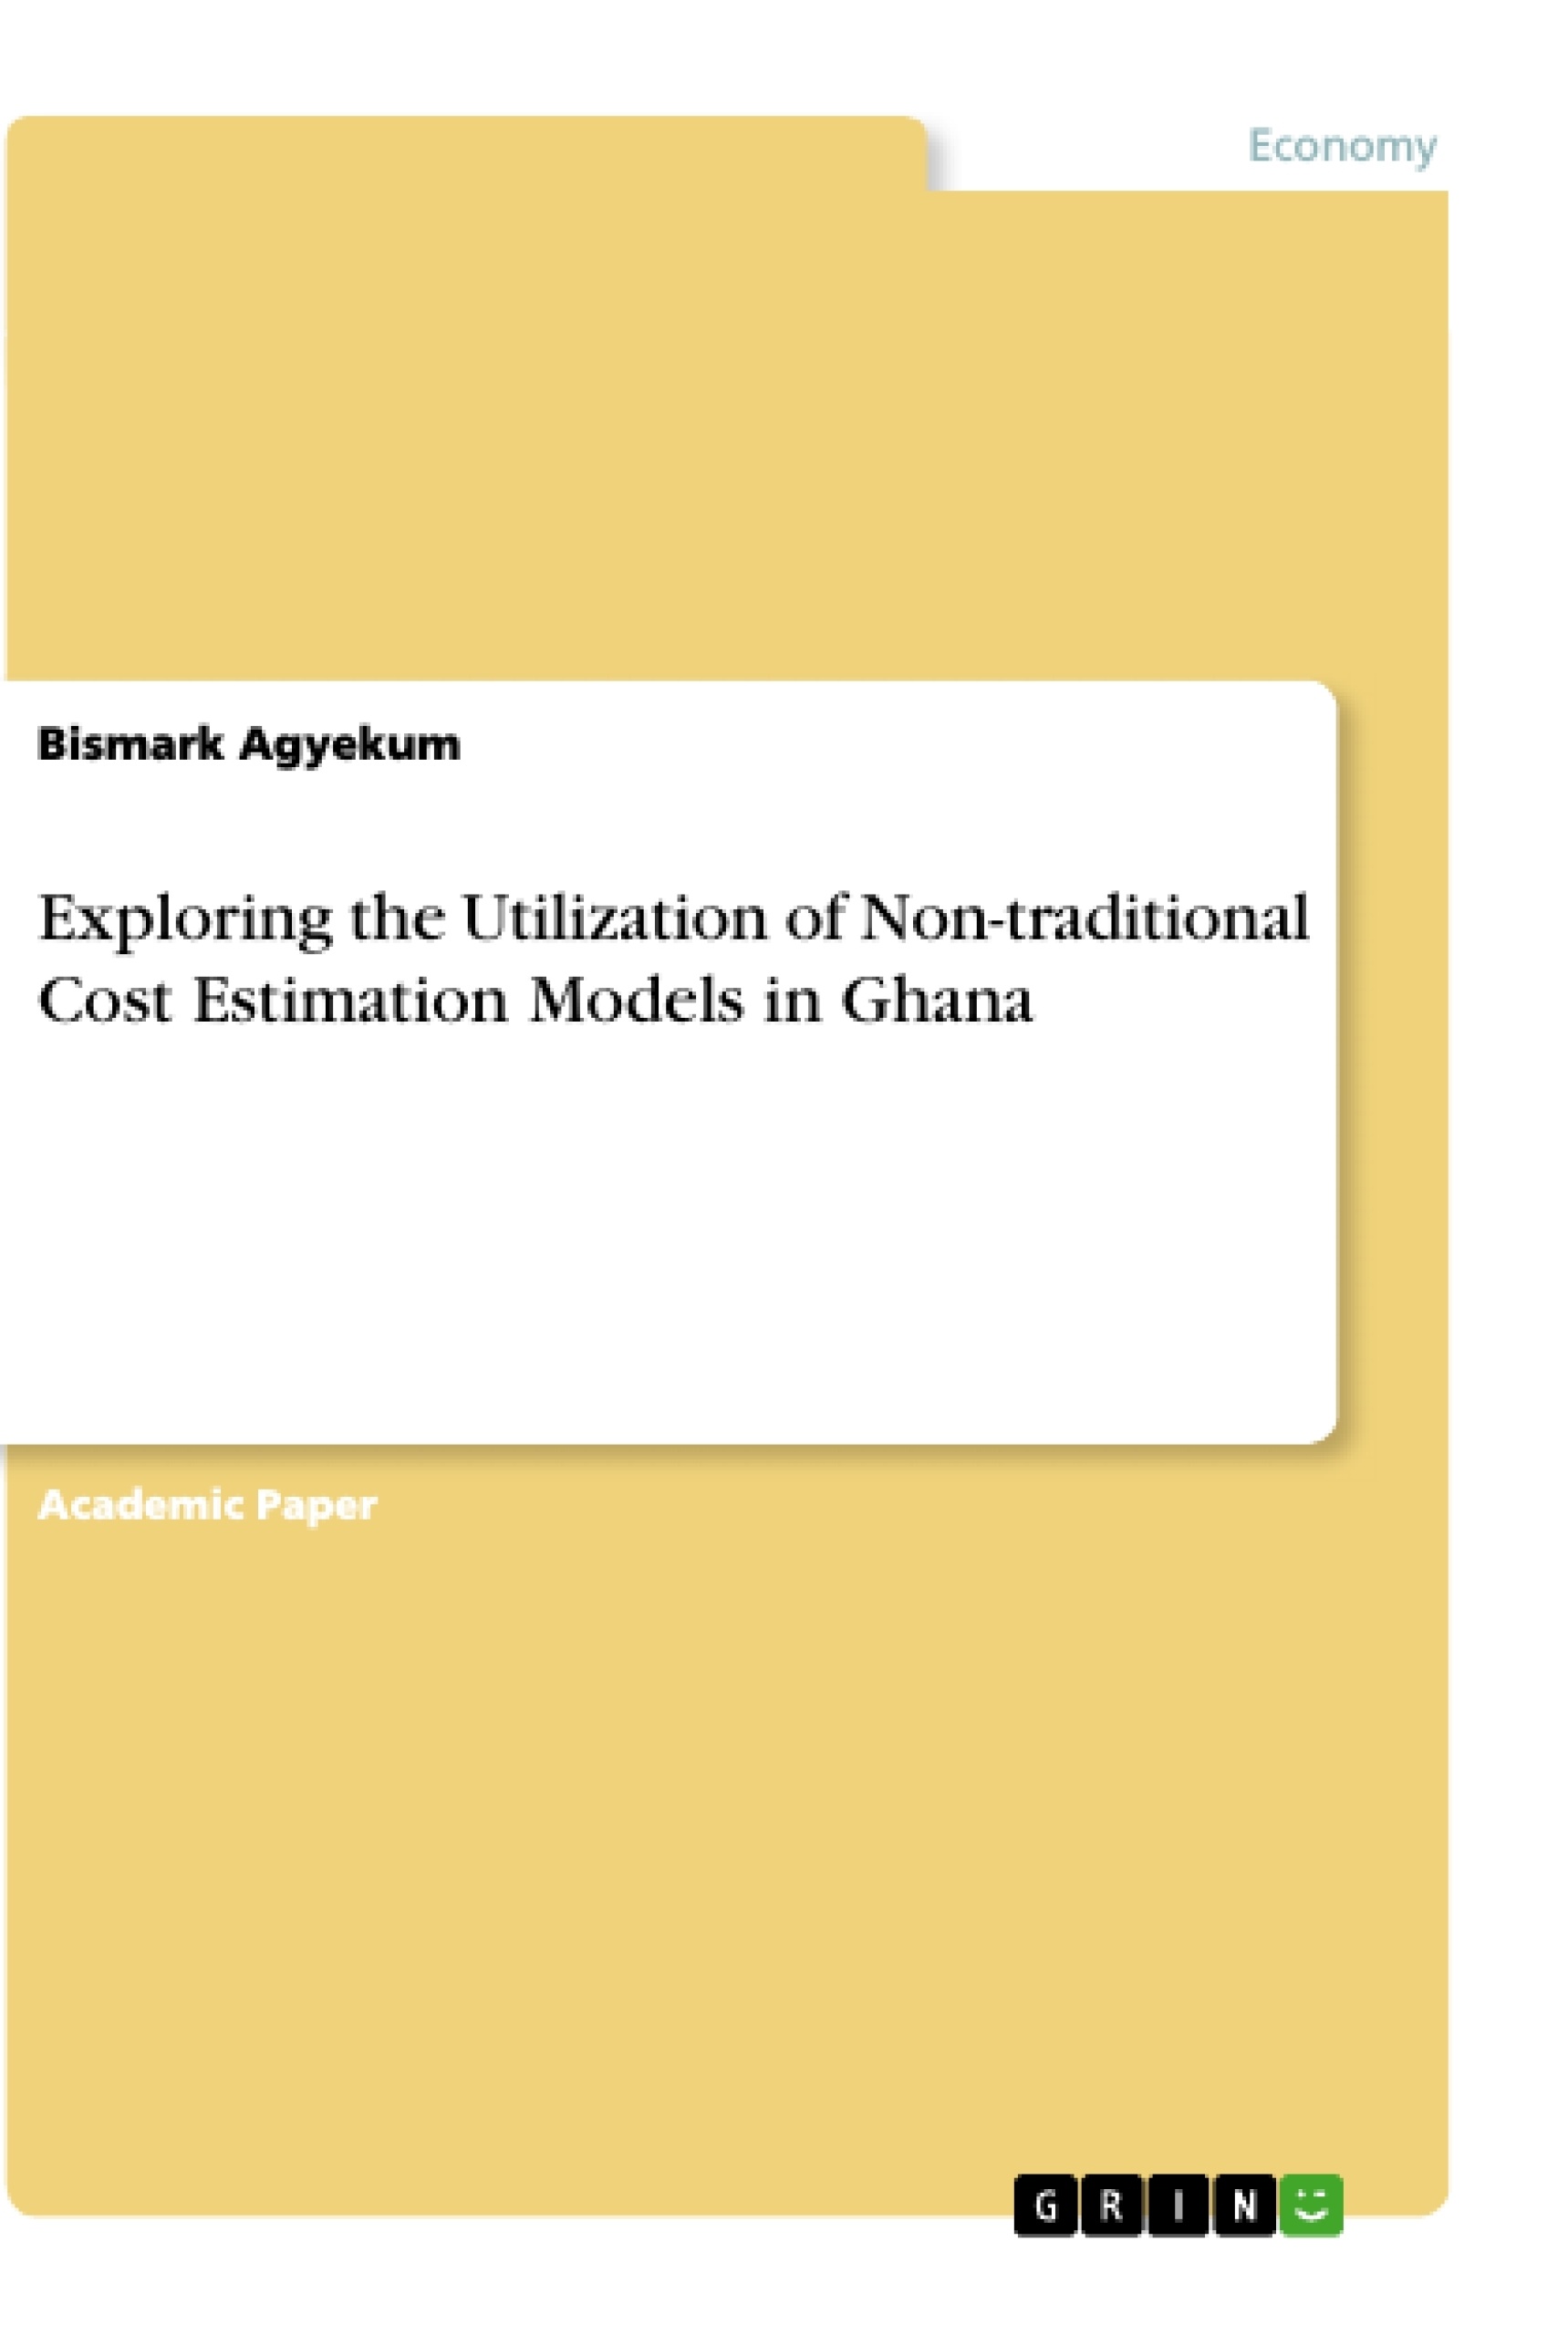 Título: Exploring the Utilization of Non-traditional Cost Estimation Models in Ghana